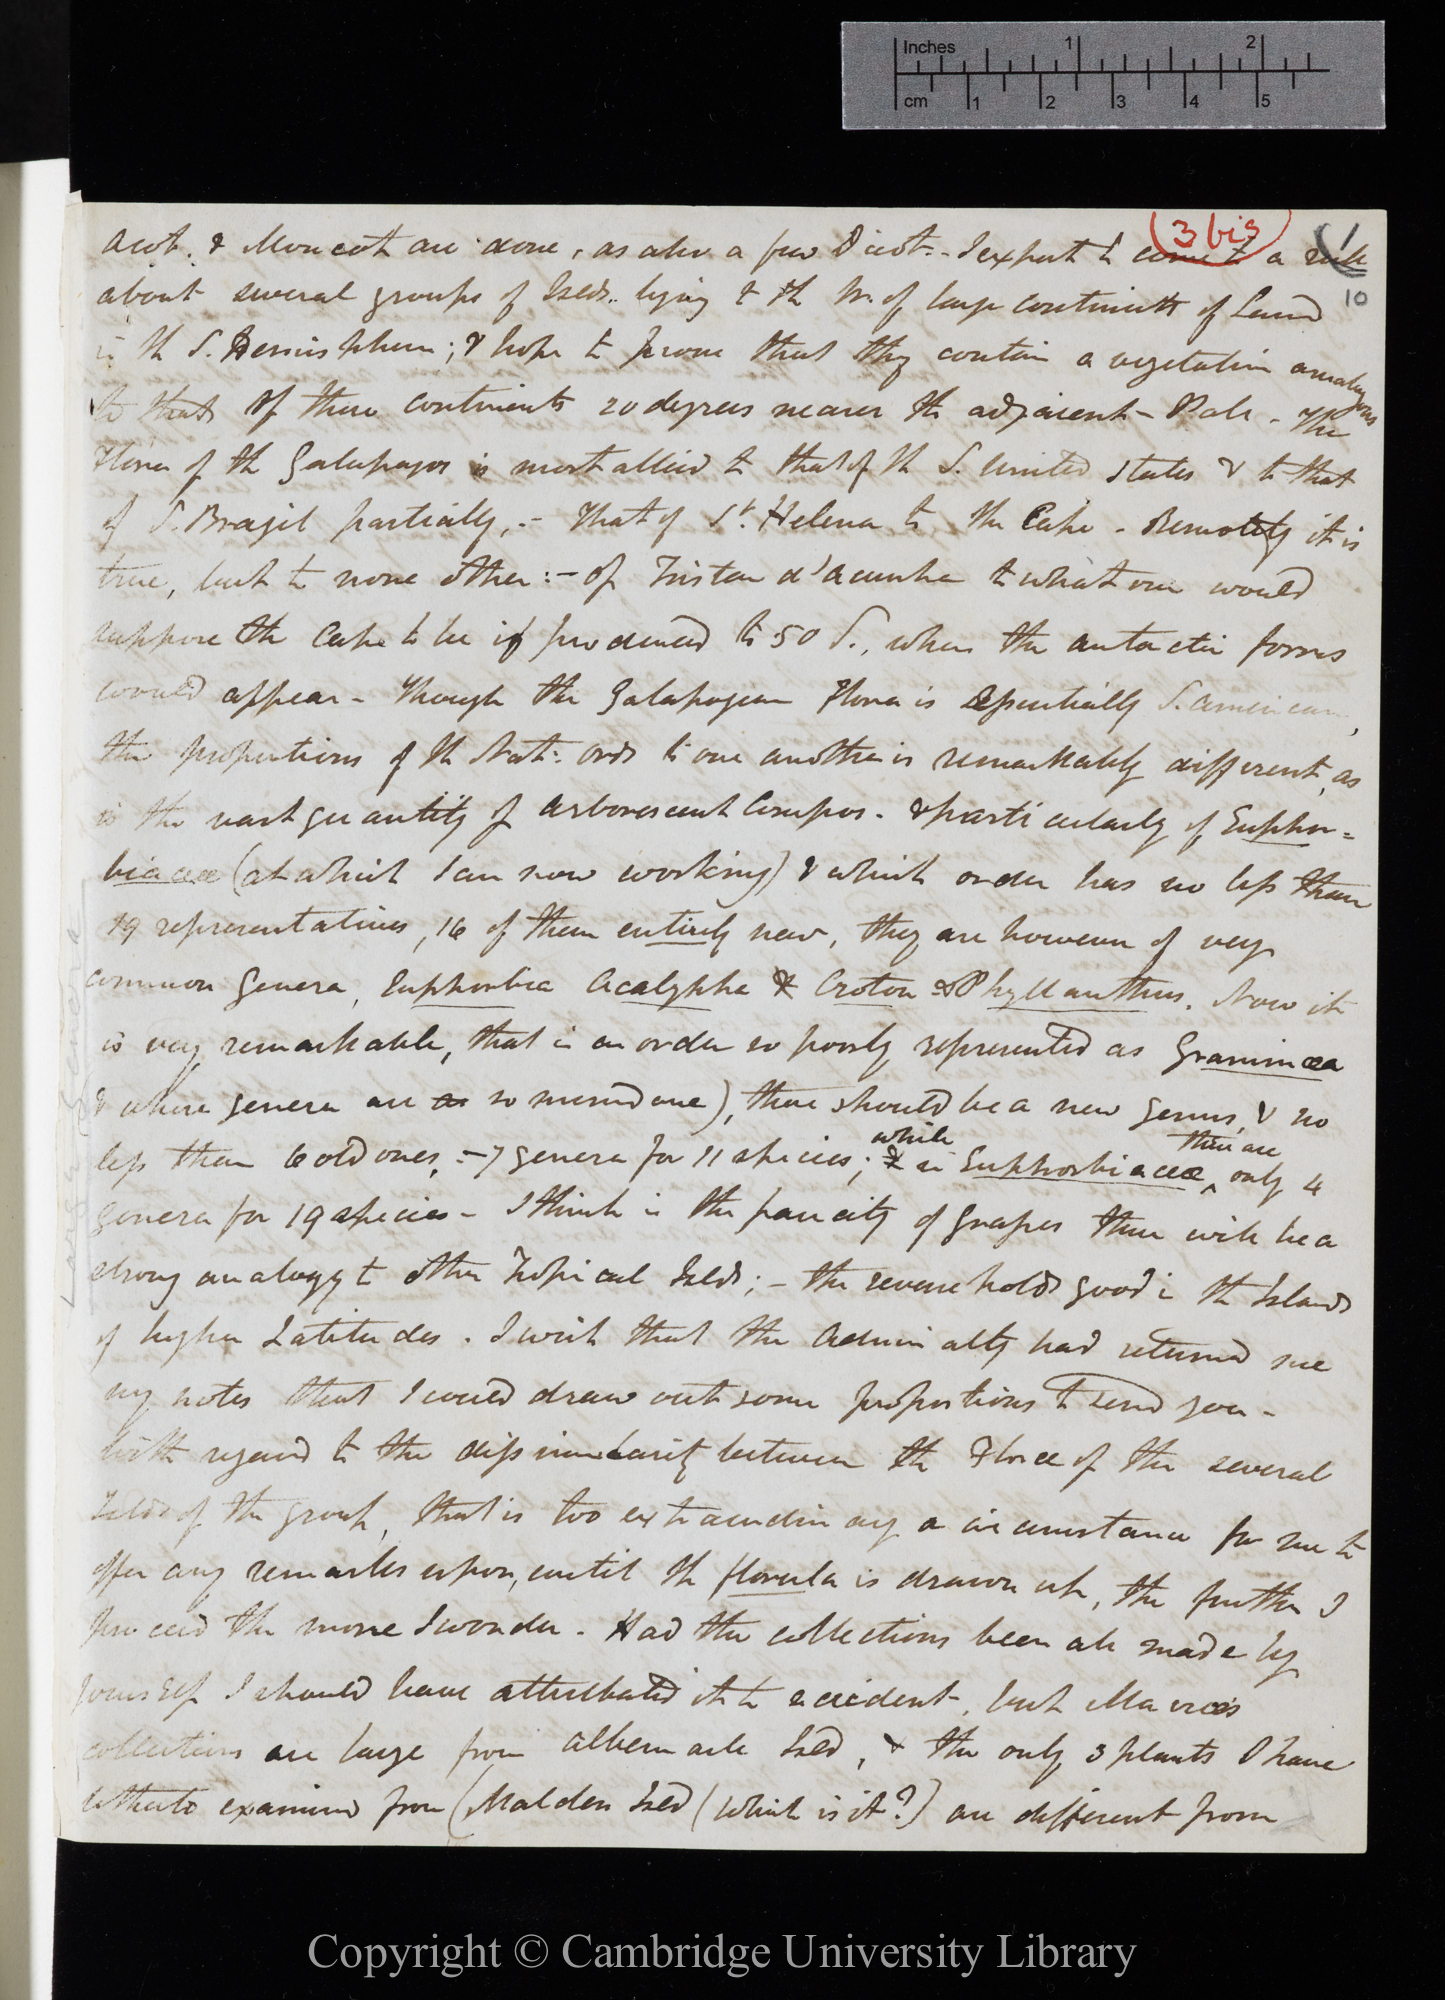 Letter from J. D. Hooker to C. R. Darwin [23 February - 6 March 1844]